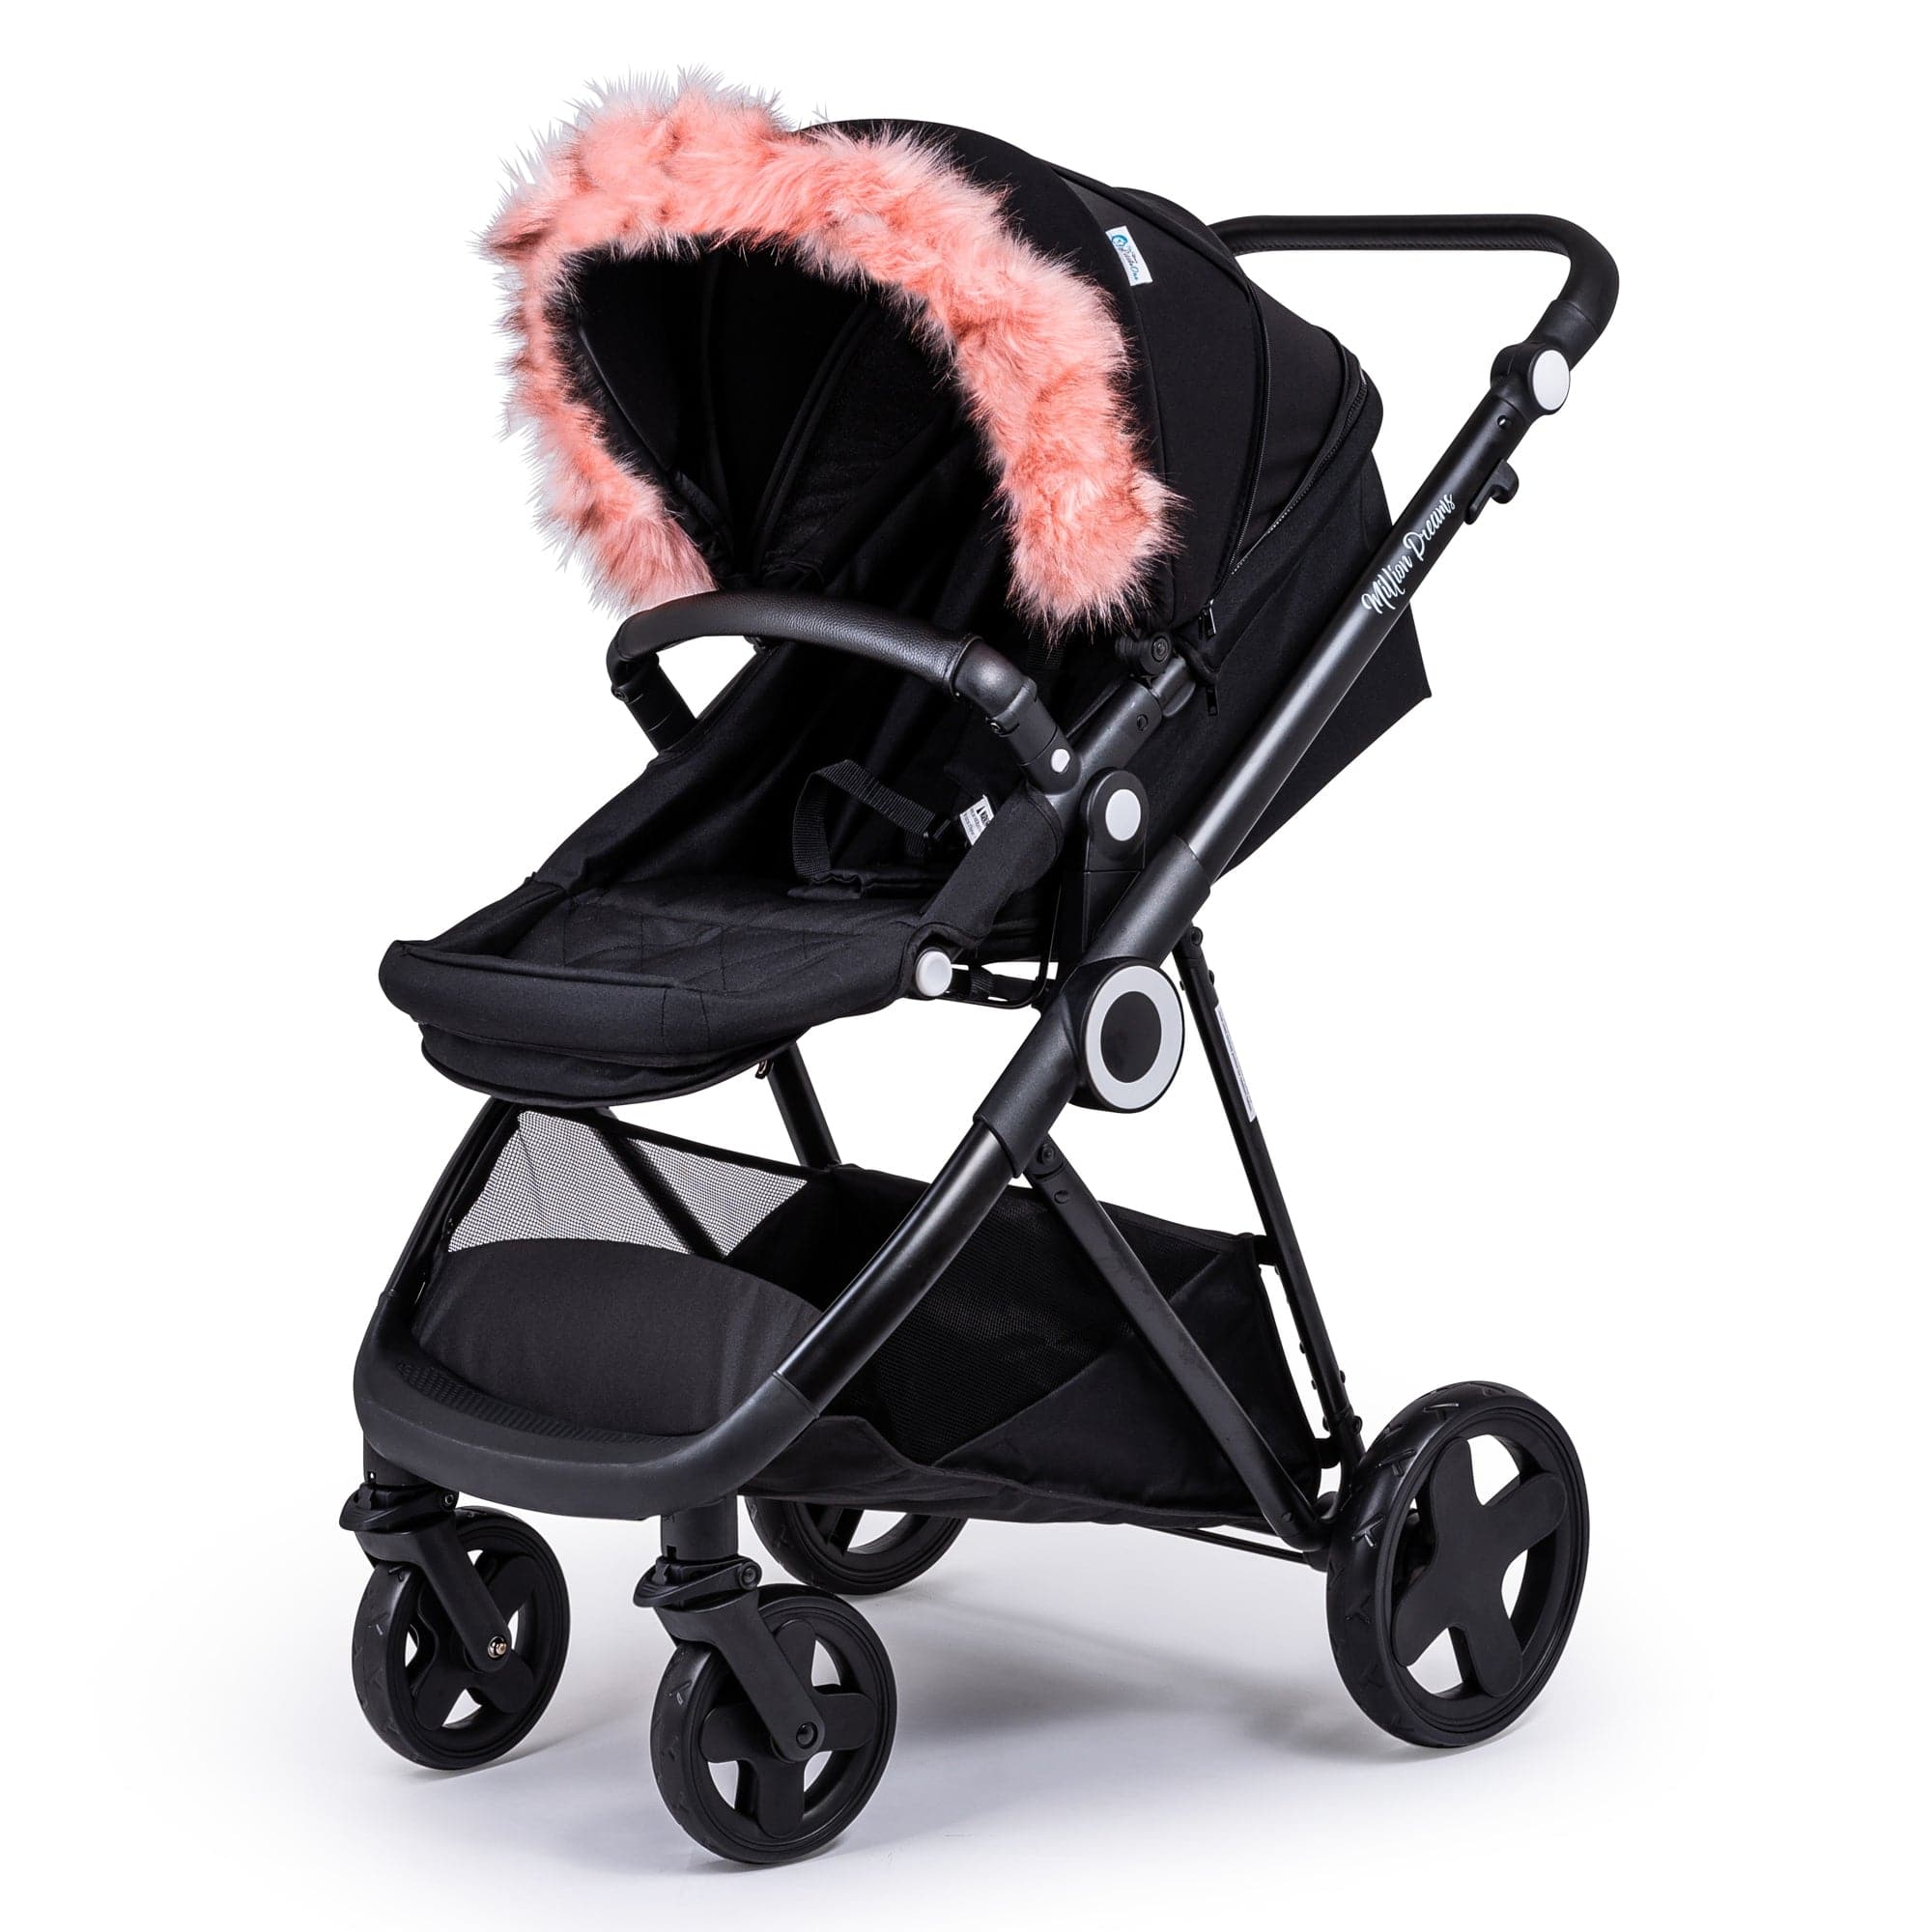 Pram Fur Hood Trim Attachment For Pushchair Compatible with Orbit Baby - Pink / Fits All Models | For Your Little One